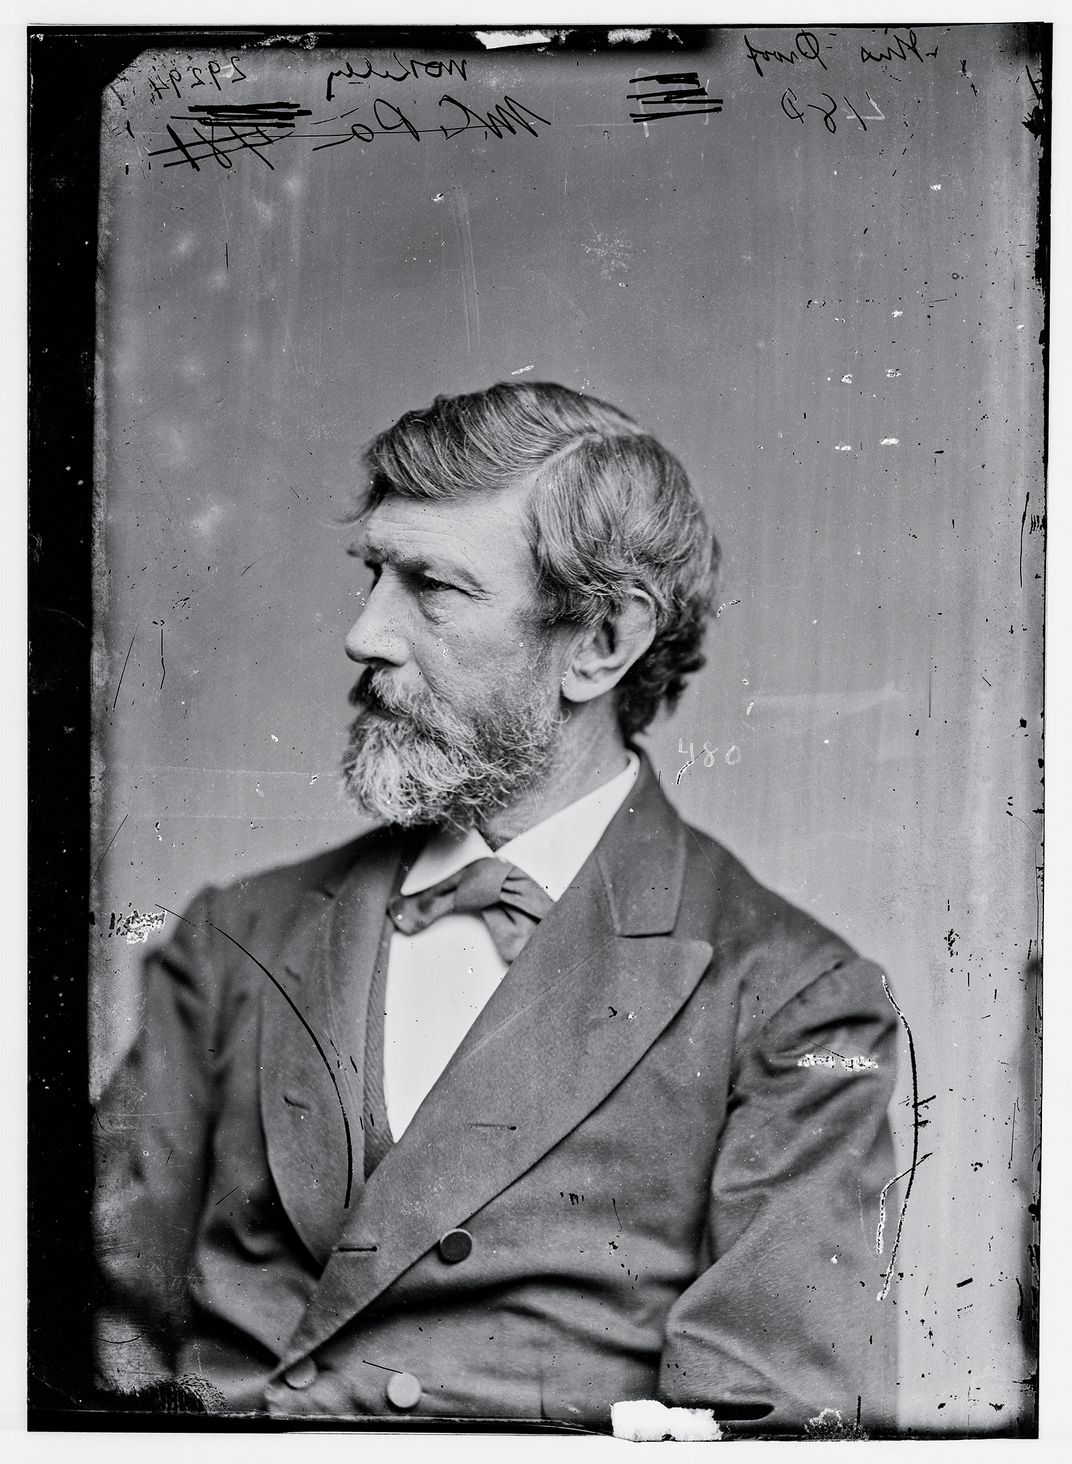 a head and shoulders portrait of a bearded man in a suit